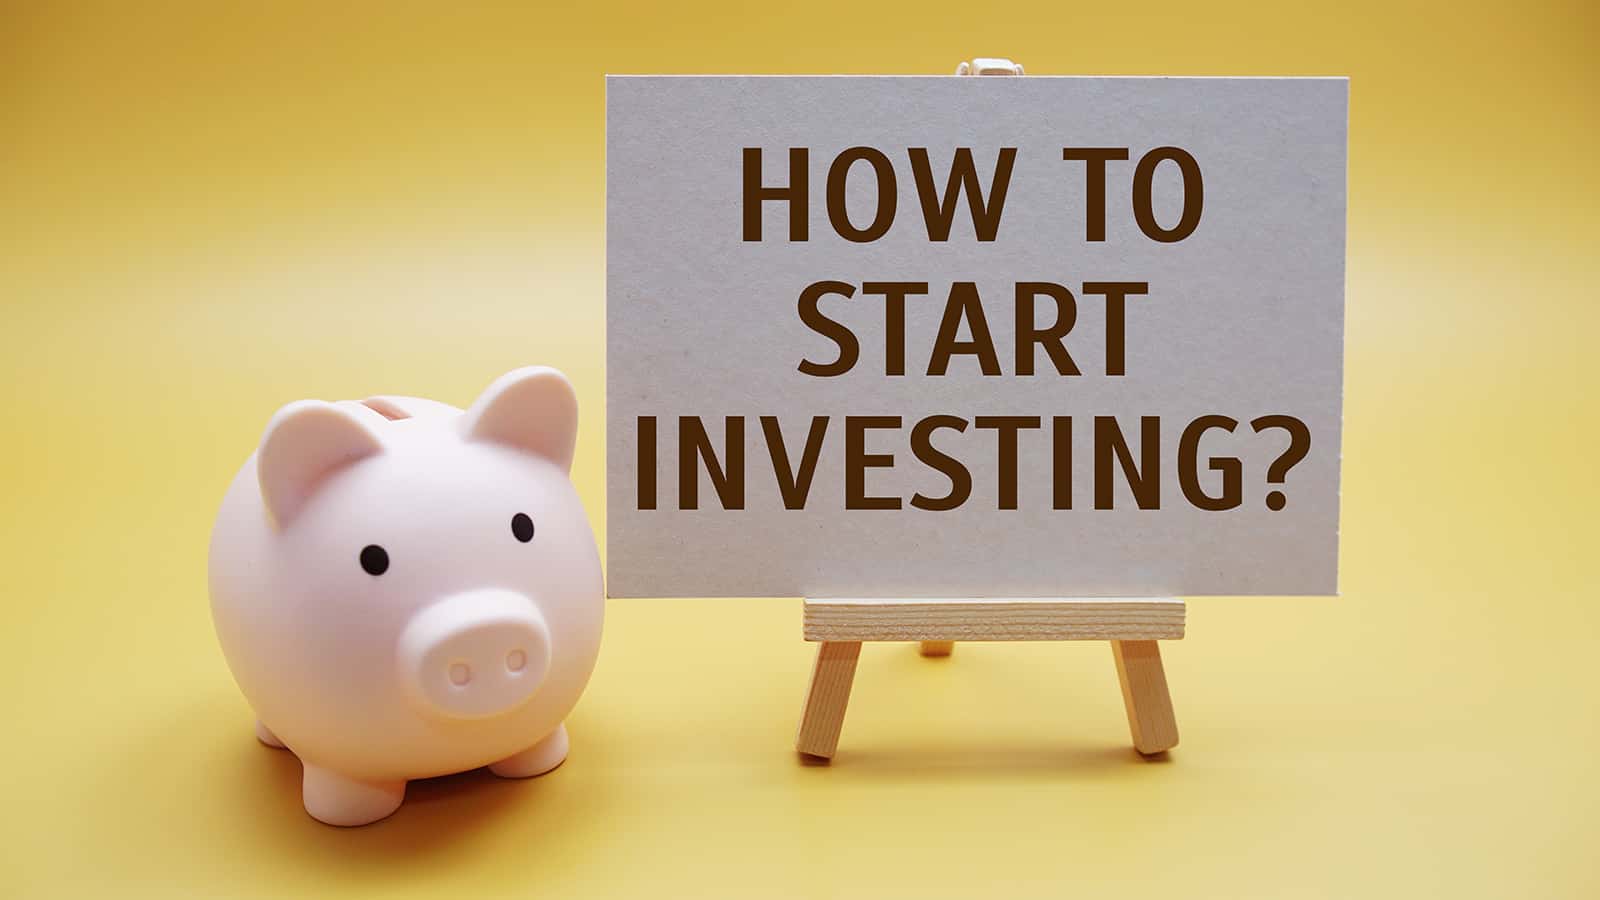 Start Investing With 500 or Less